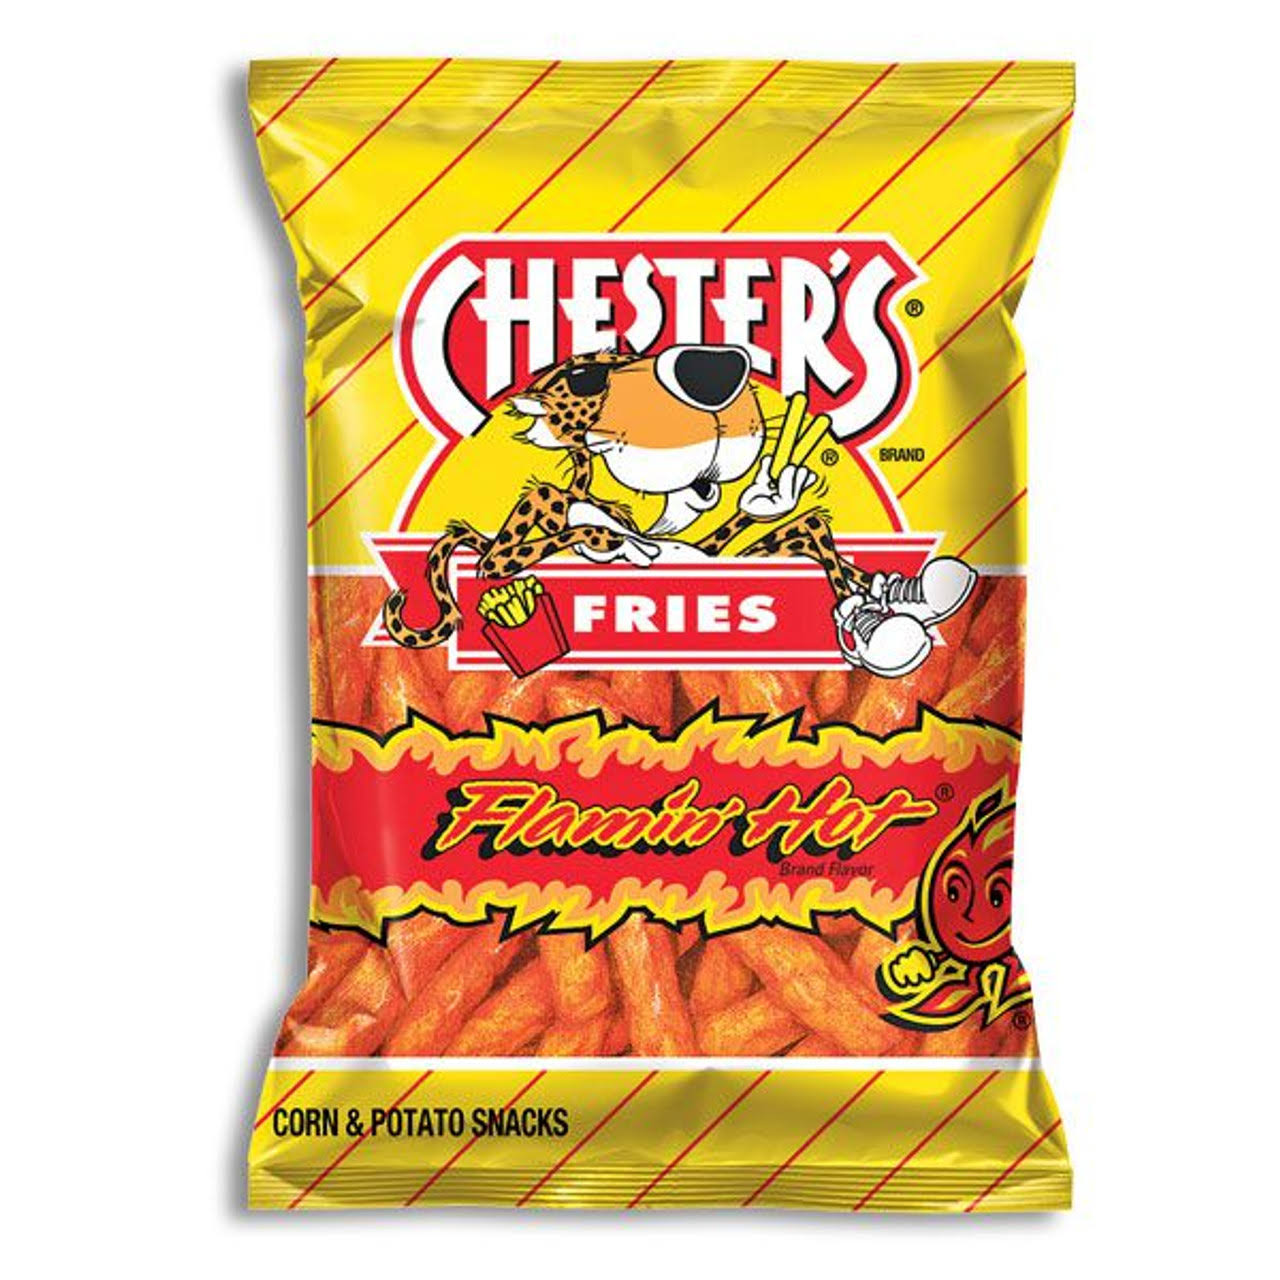 Chesters Fries Flamin Hot (49.6g)